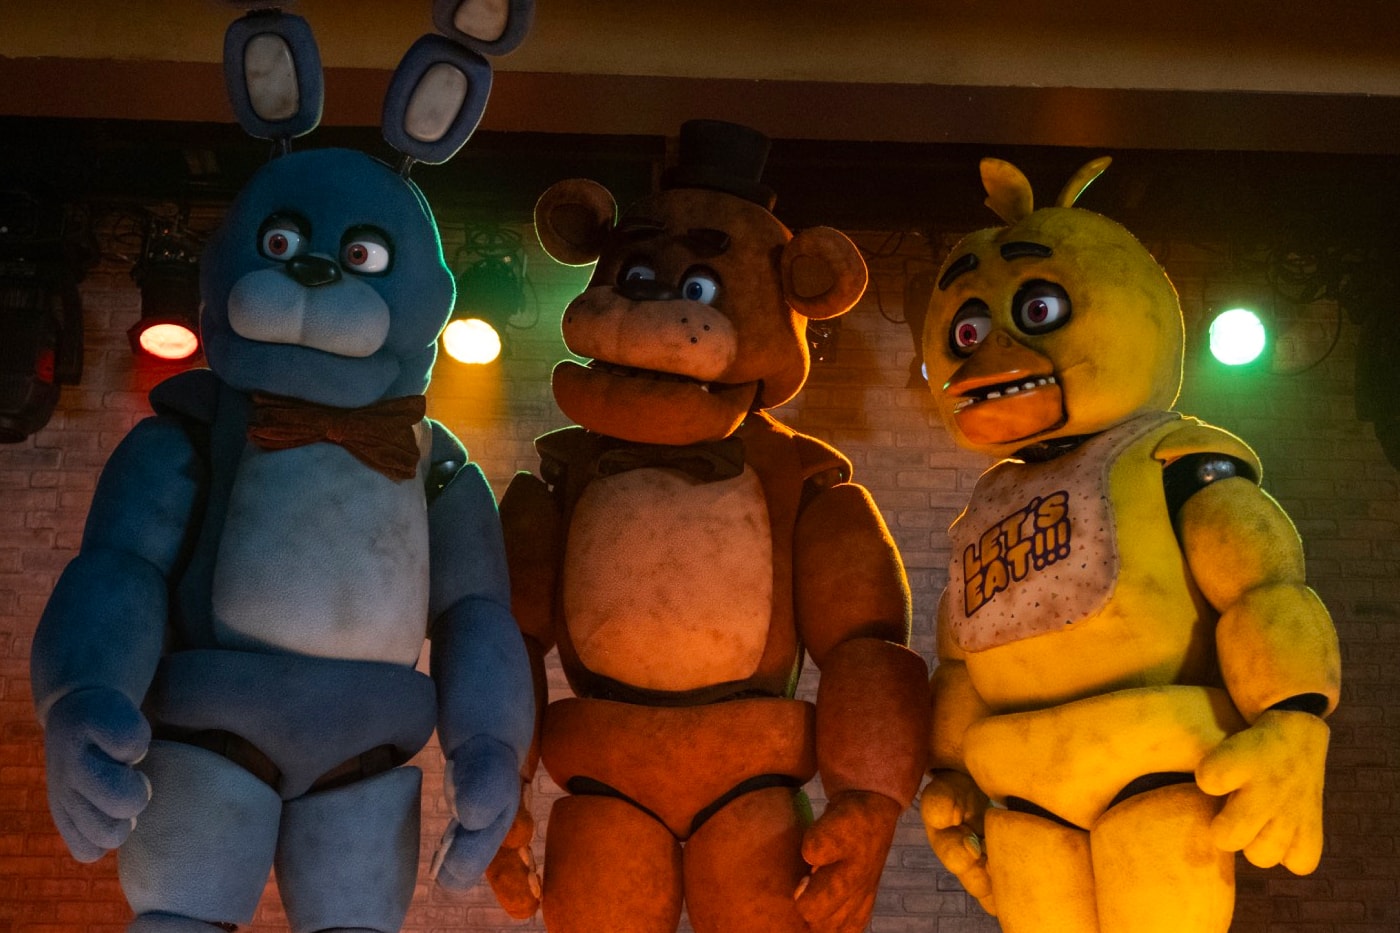 'Five Nights at Freddy's 2' Is Officially in the Works universal blumhouse productions cinemacon chuck e. cheese haunted horror thriller josh hutcherson nighttime security 